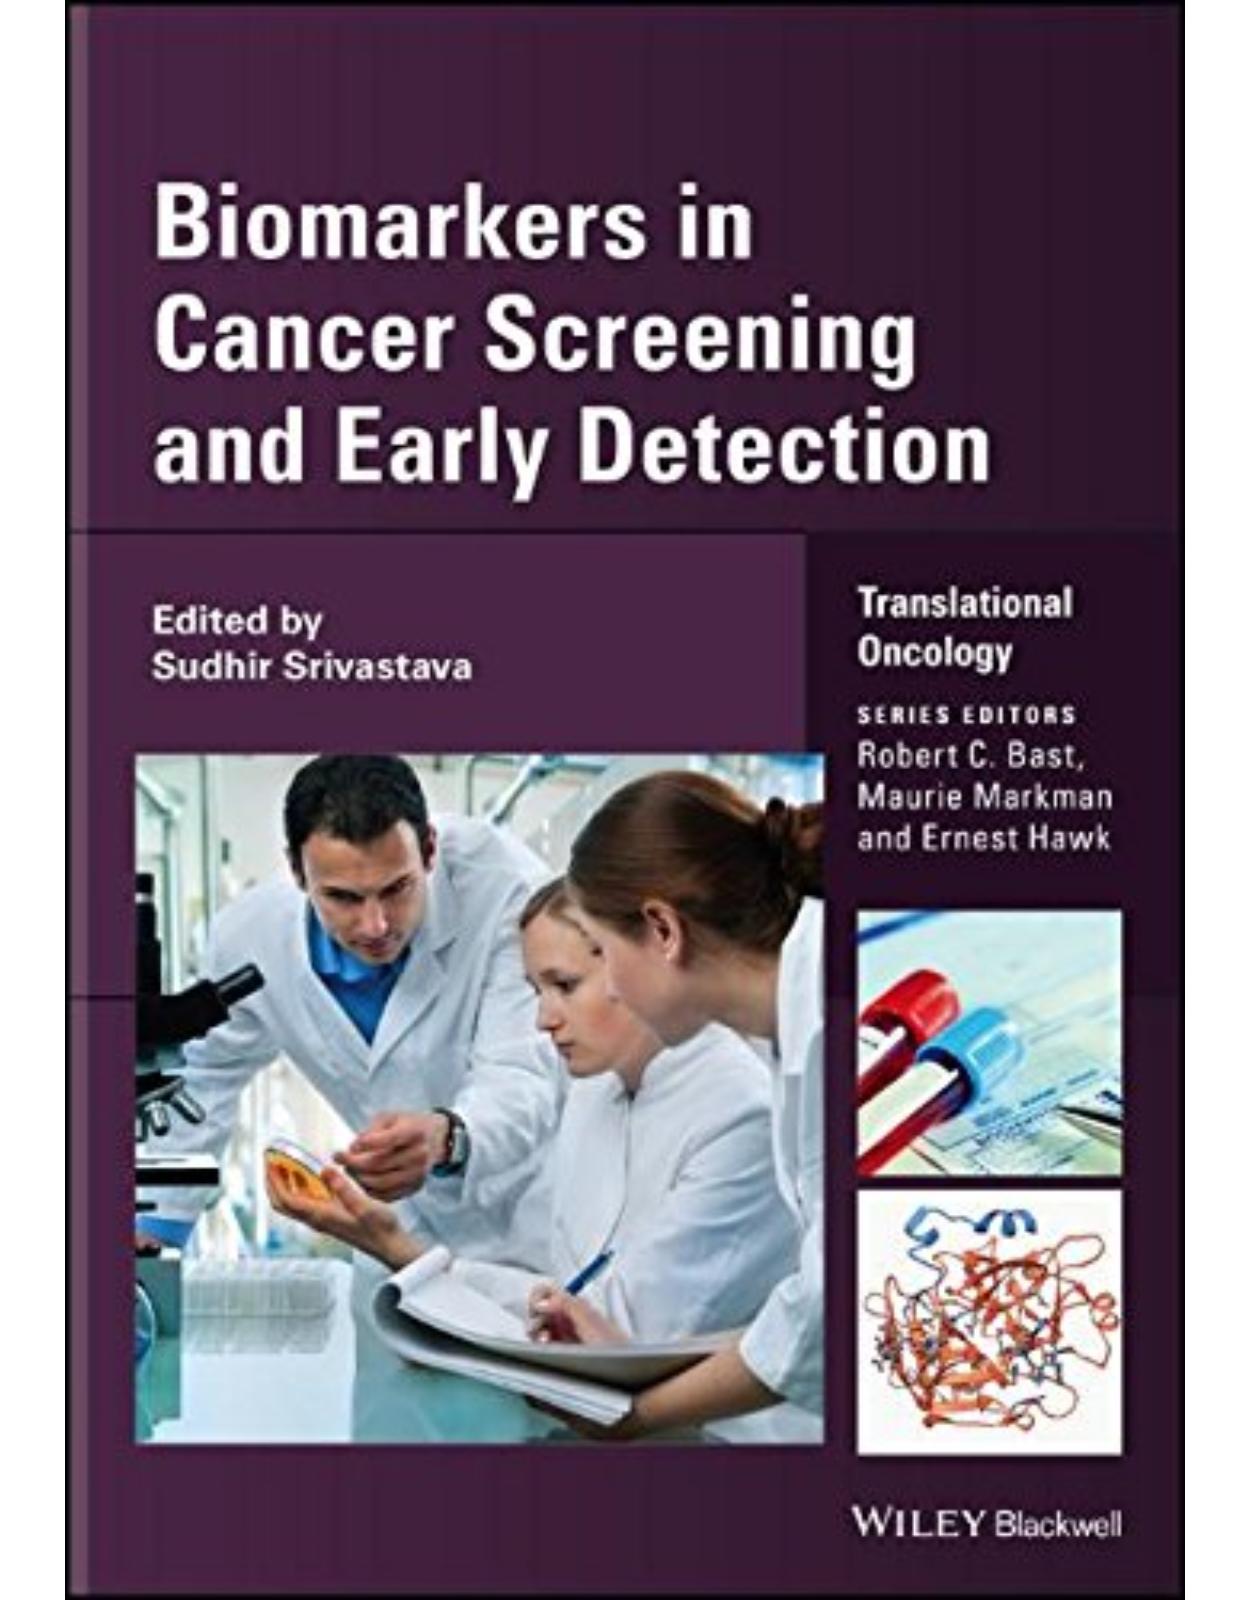 Biomarkers in Cancer Screening and Early Detection (Translational Oncology)